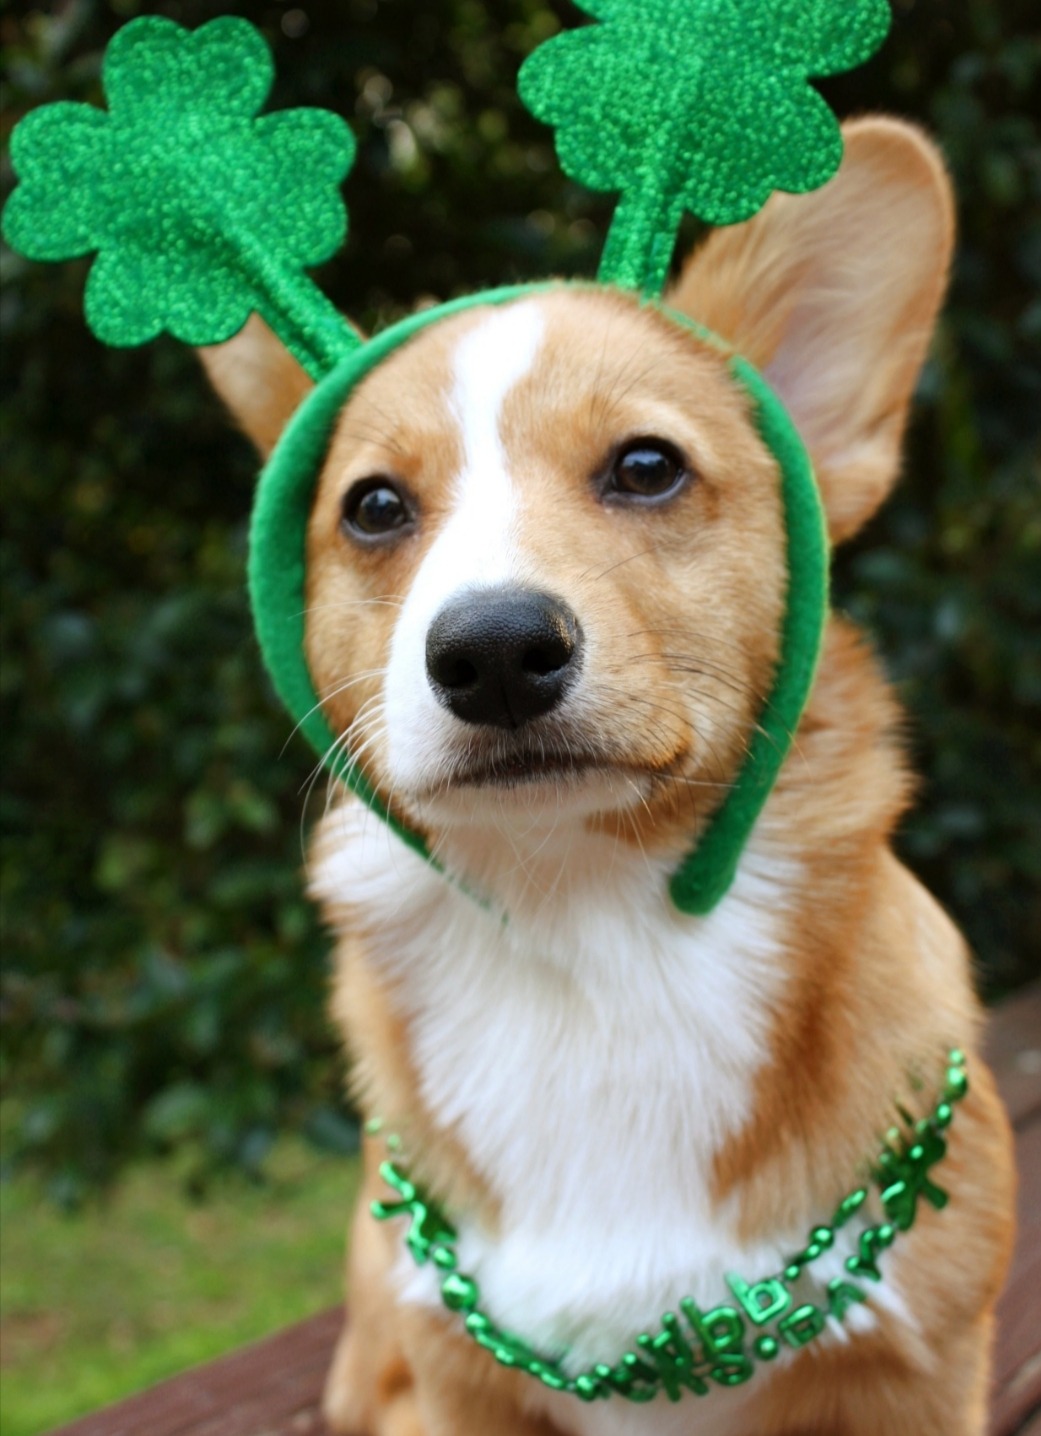 Get your entries in for the Connolly’s Redmills St Pawtrick’s day virtual dog show in aid of PAWS Animal Rescue